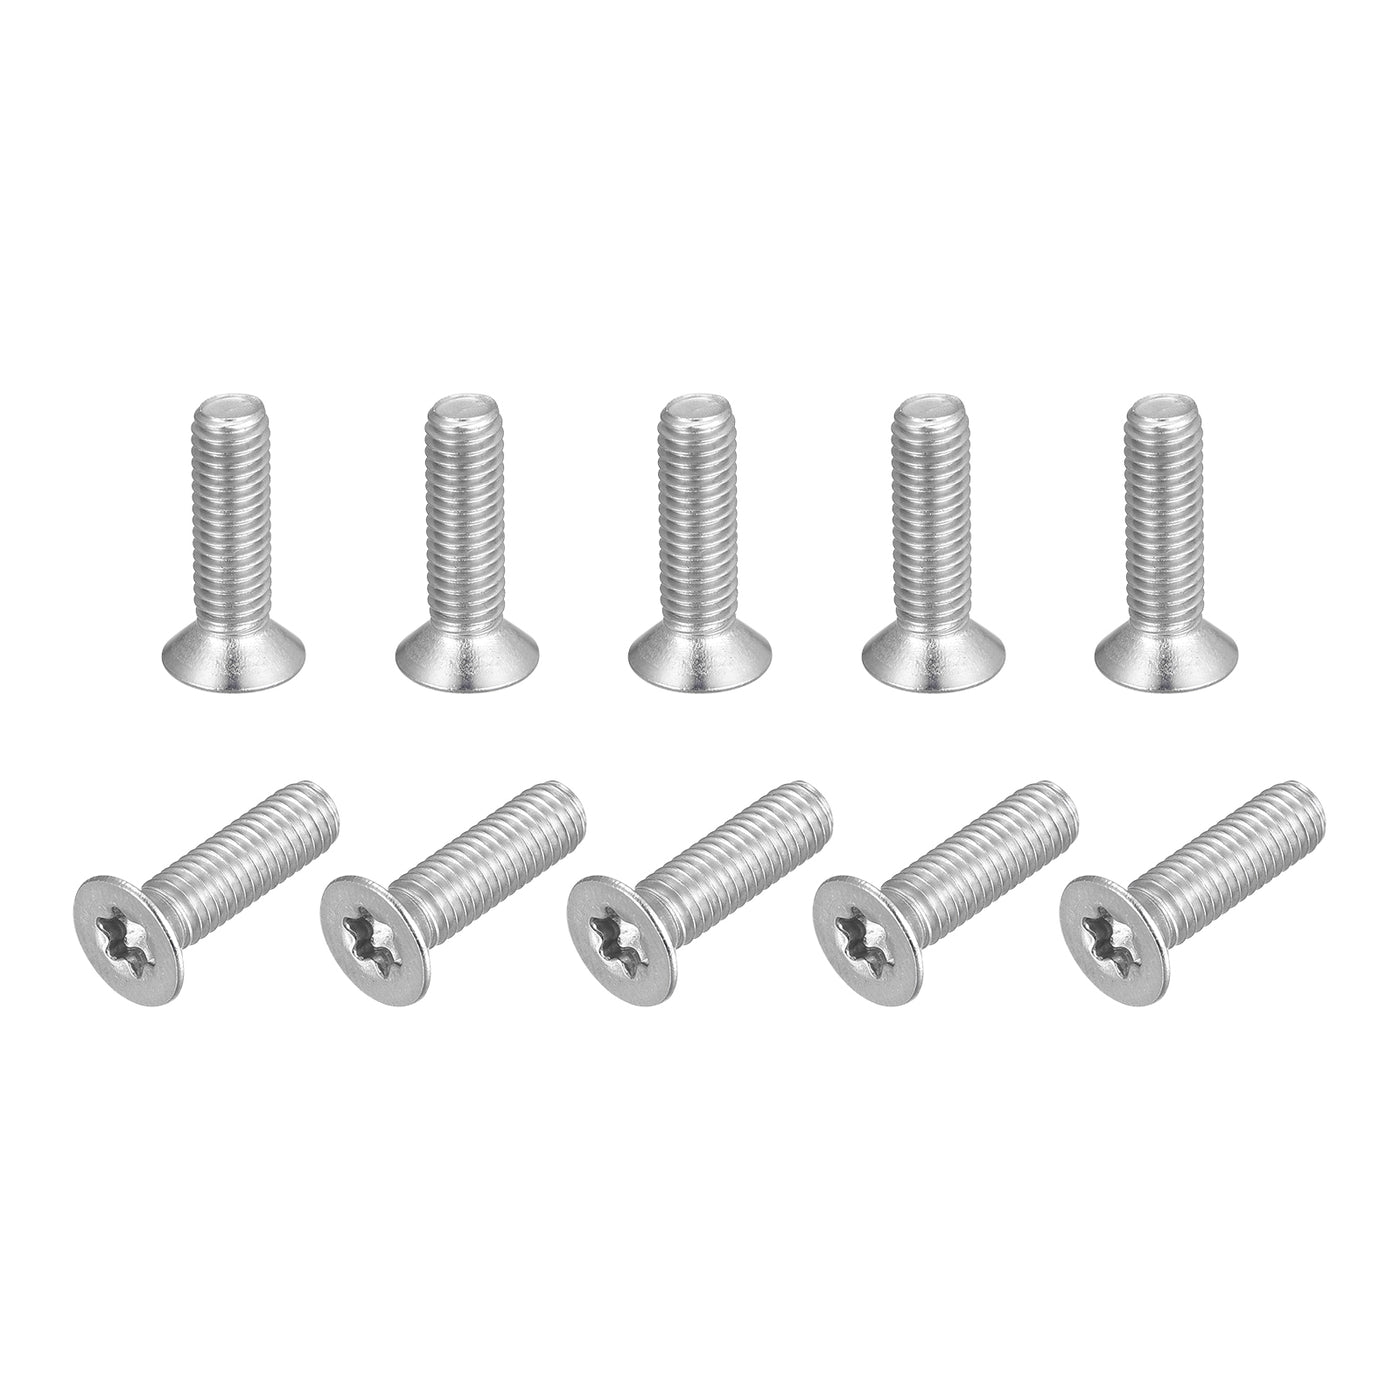 uxcell Uxcell M5x18mm Torx Security Screws, 20pcs 316 Stainless Steel Countersunk Head Screw